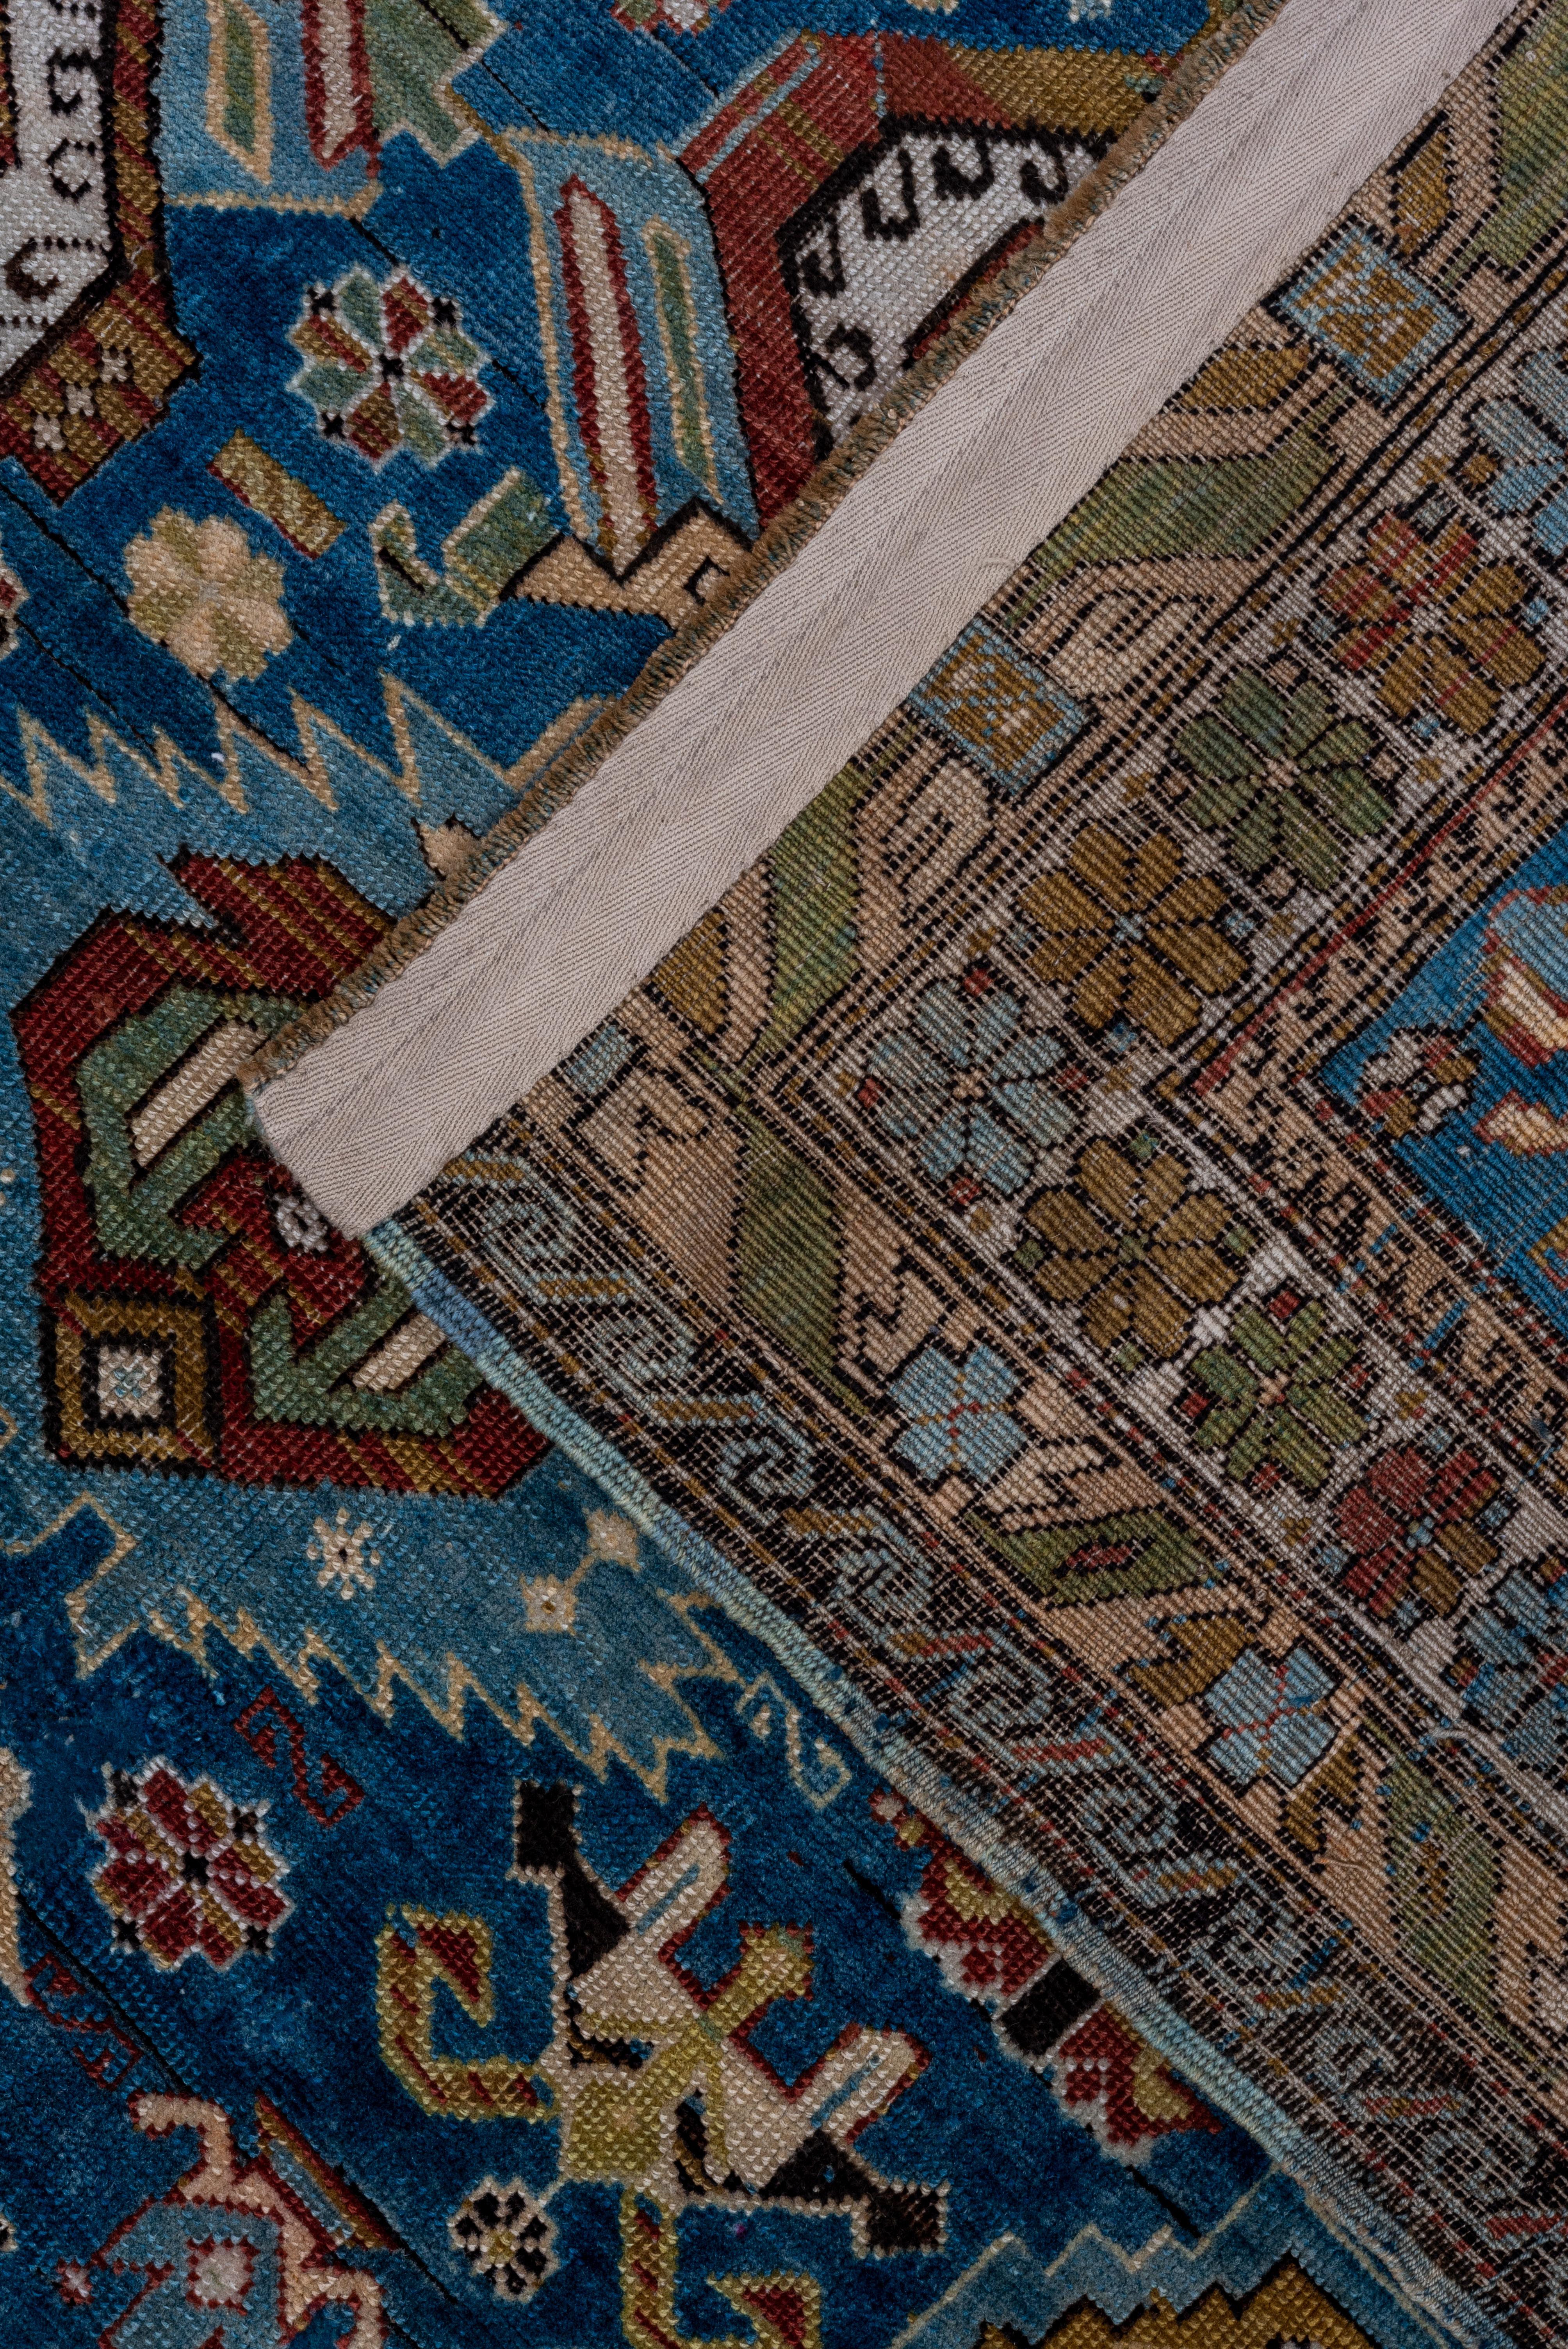 Wool Rare and Fine Antique Caucasian Kuba Area Rug, Mint Condition, Bright Blue Field For Sale